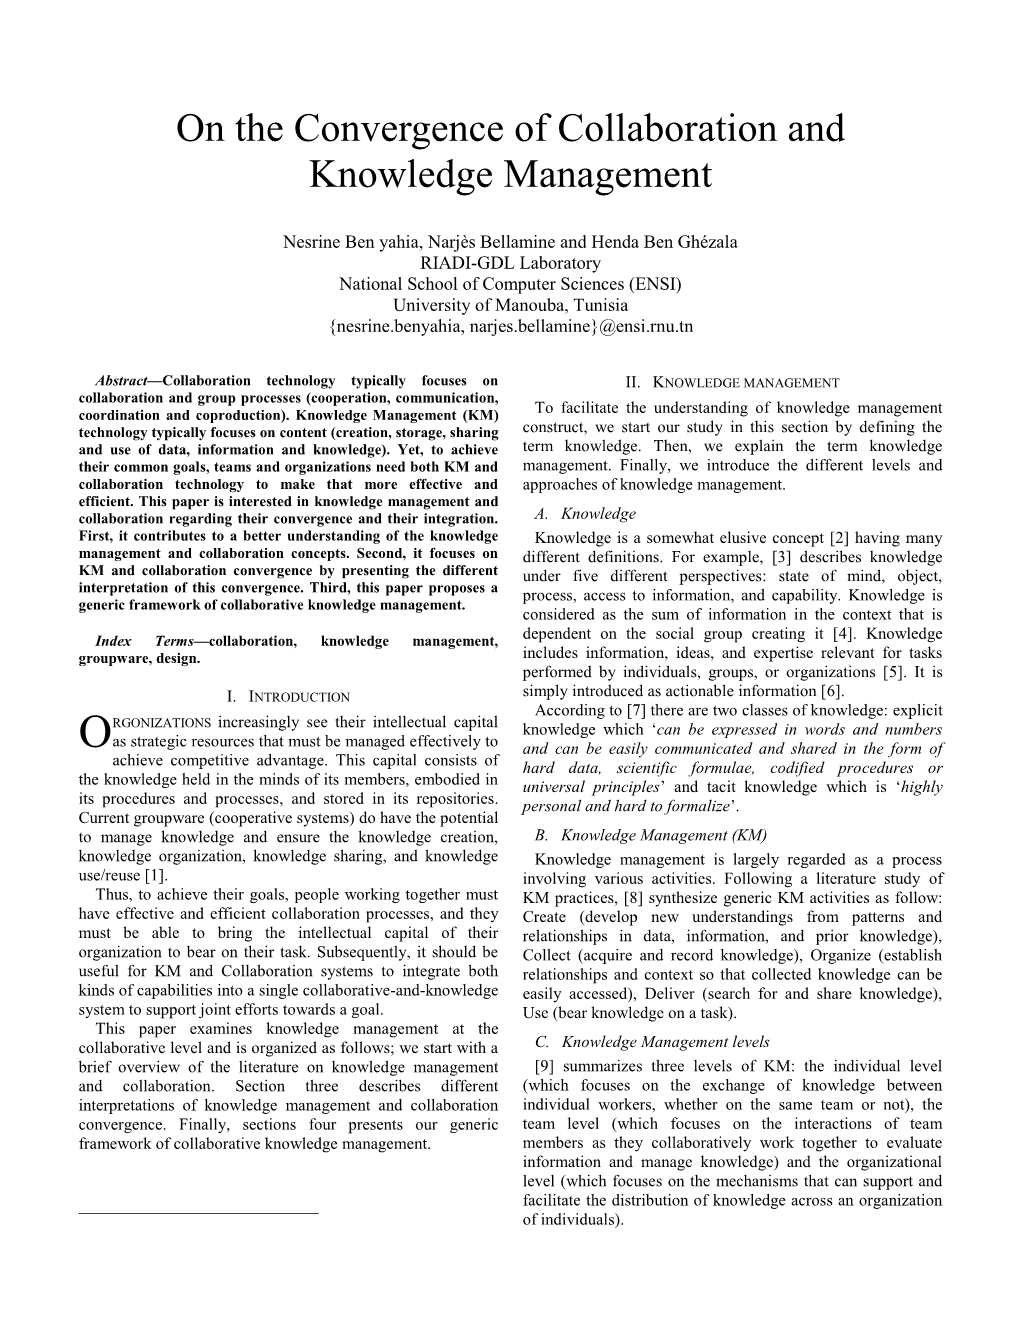 On the Convergence of Collaboration and Knowledge Management